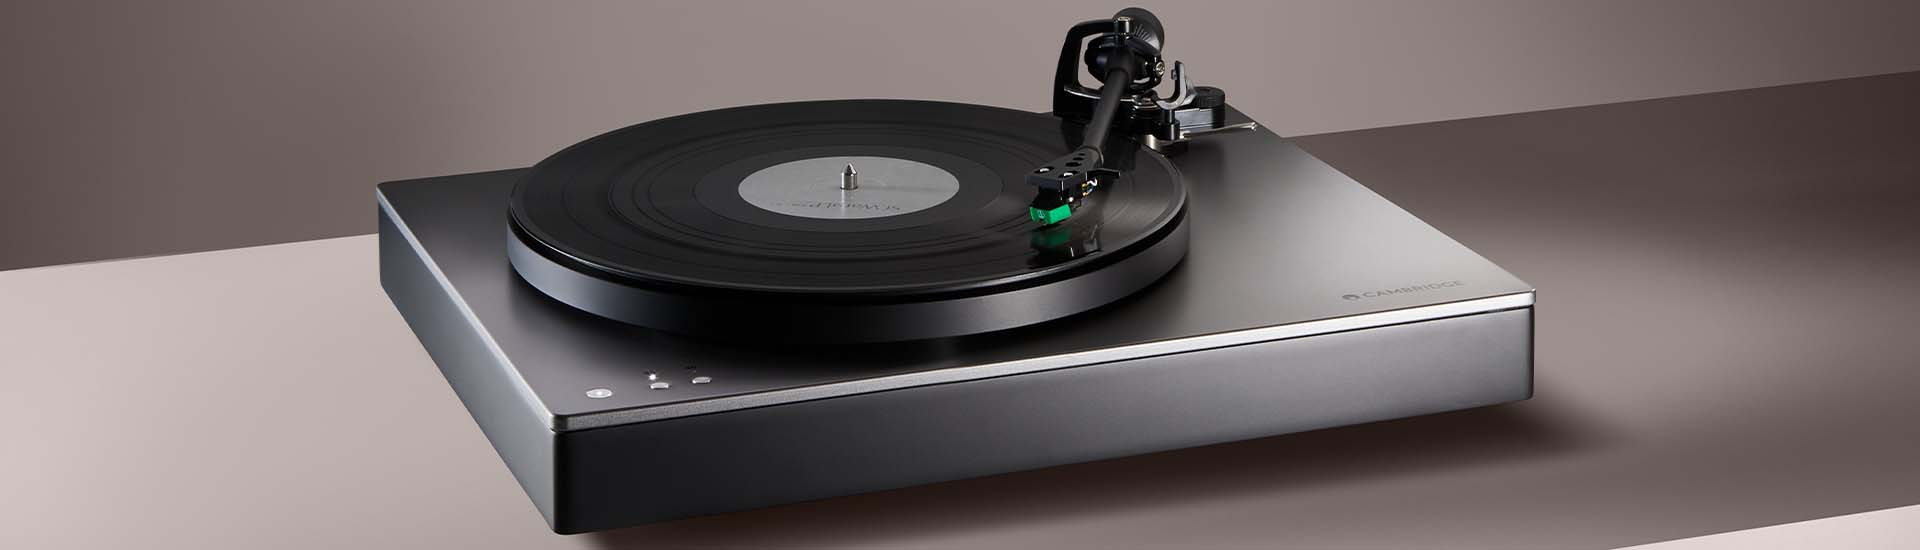 Decipher common faults of Bluetooth turntables and enjoy a worry-free music experience插图